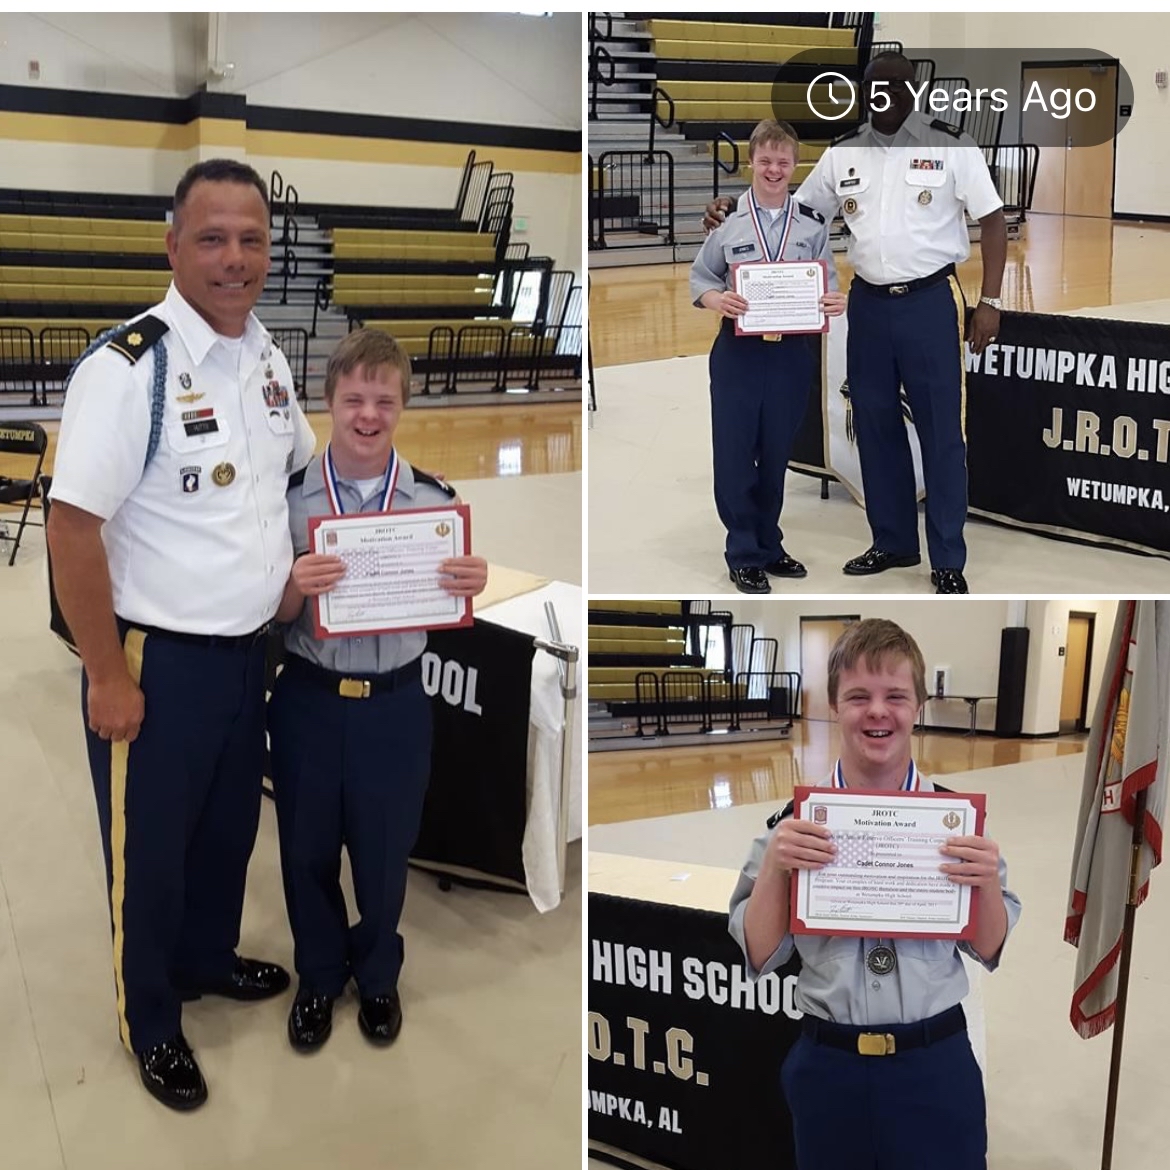 Connor Jones was a student in Mrs. D's Class that decided to visit our JROTC class.  He loved it so much that he stayed with us for the next few years.  He was such a blessing for MAJ Hutto, SFC Hunter, and the other Cadets.